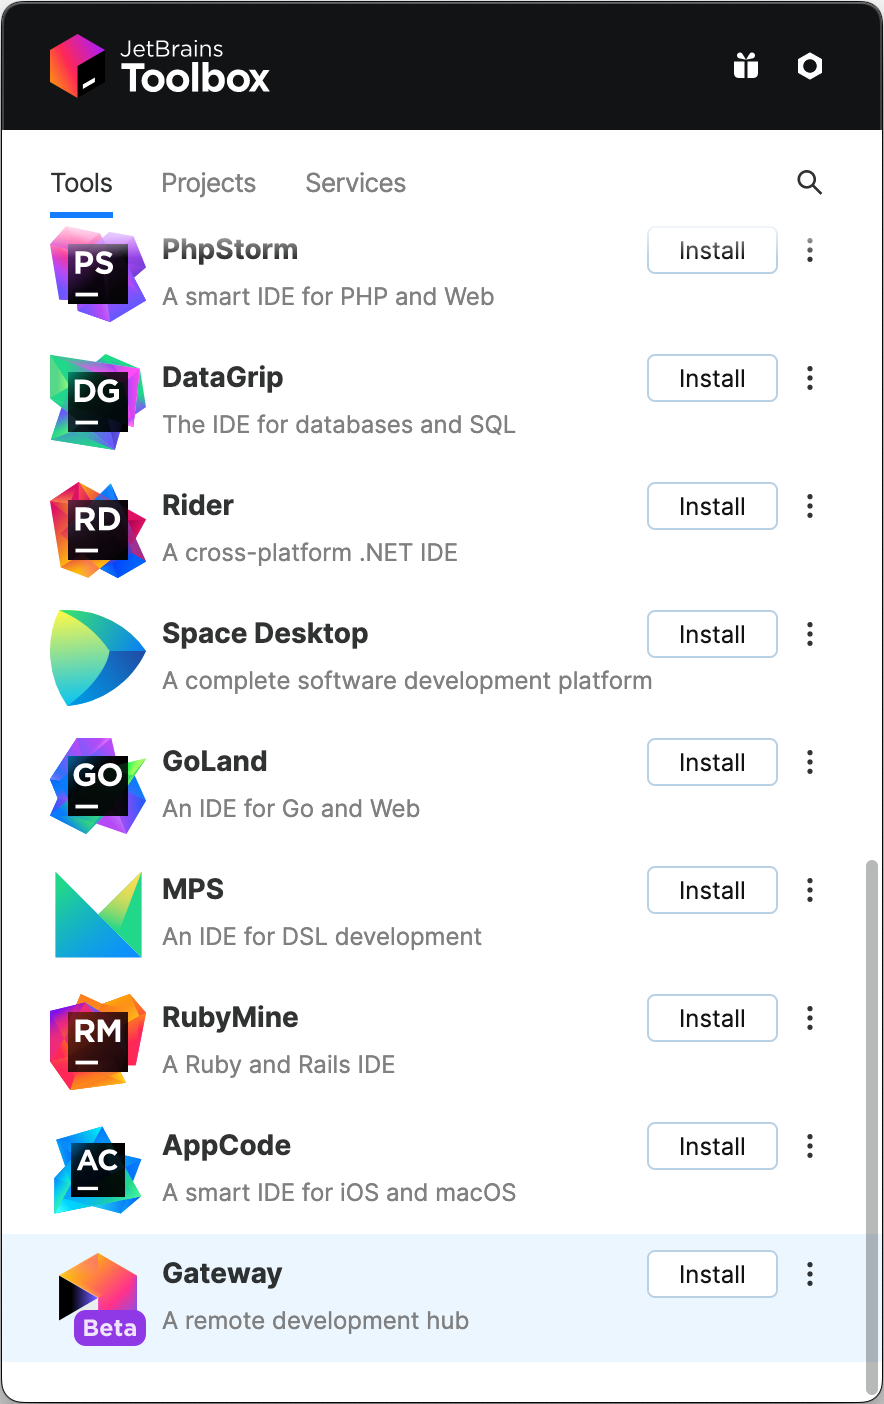 Screenshot of the JetBrains Toolbox with "Gateway" at the bottom of the list of applications. Each application has an "Install" button next to it.